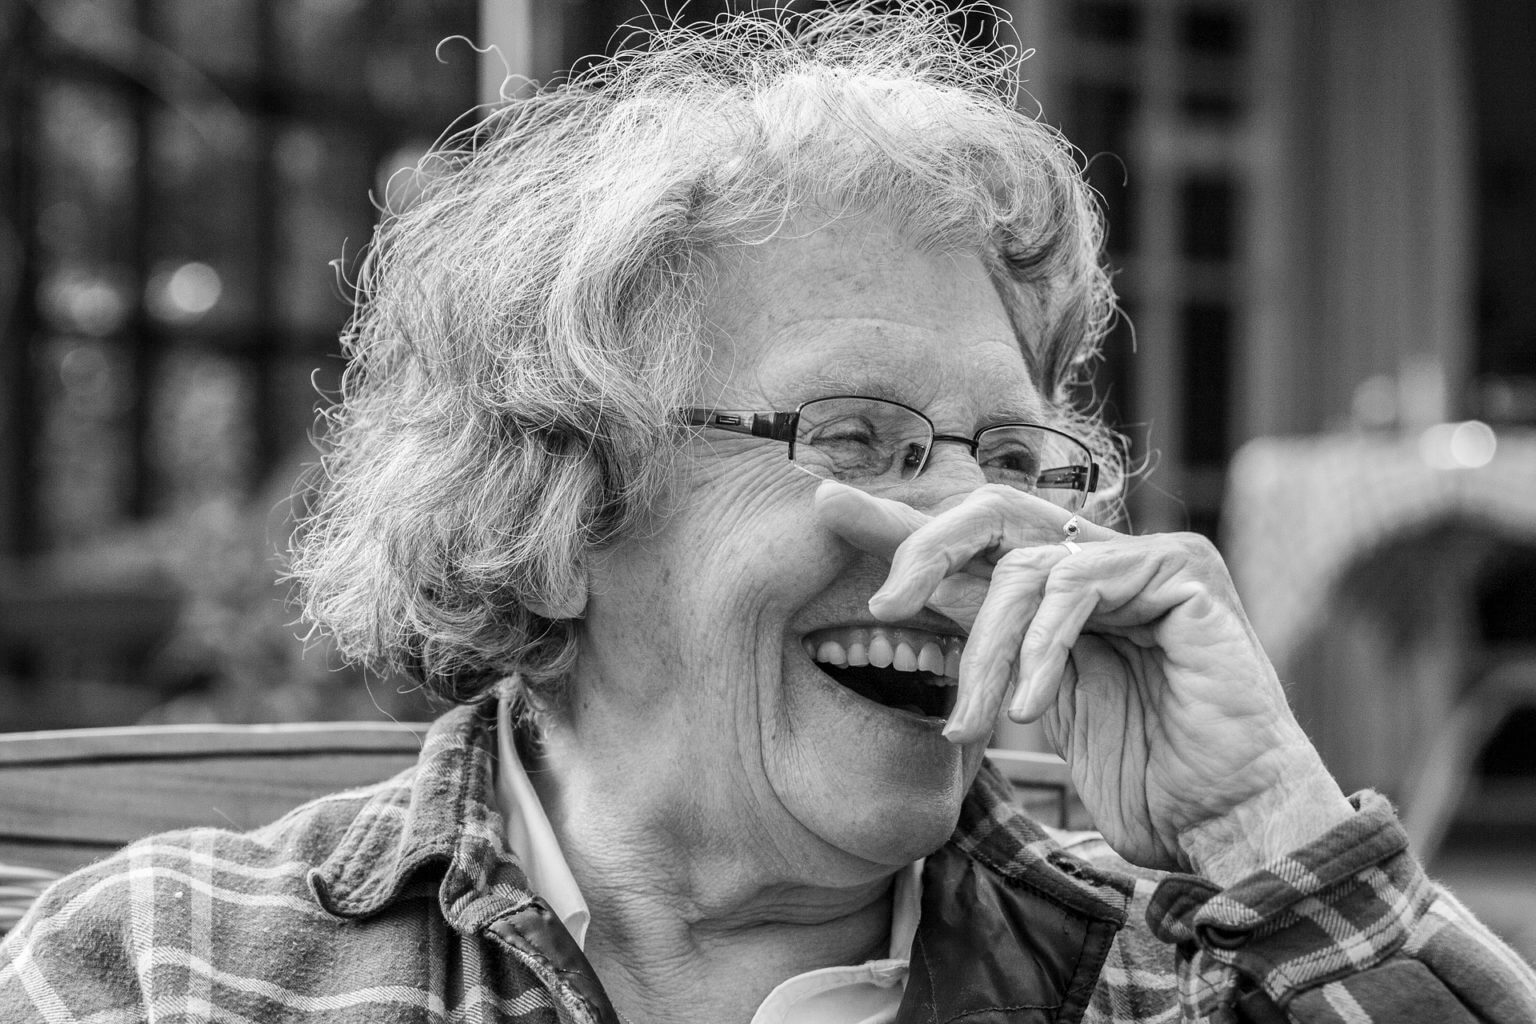 A woman laughing replace teeth in dentures